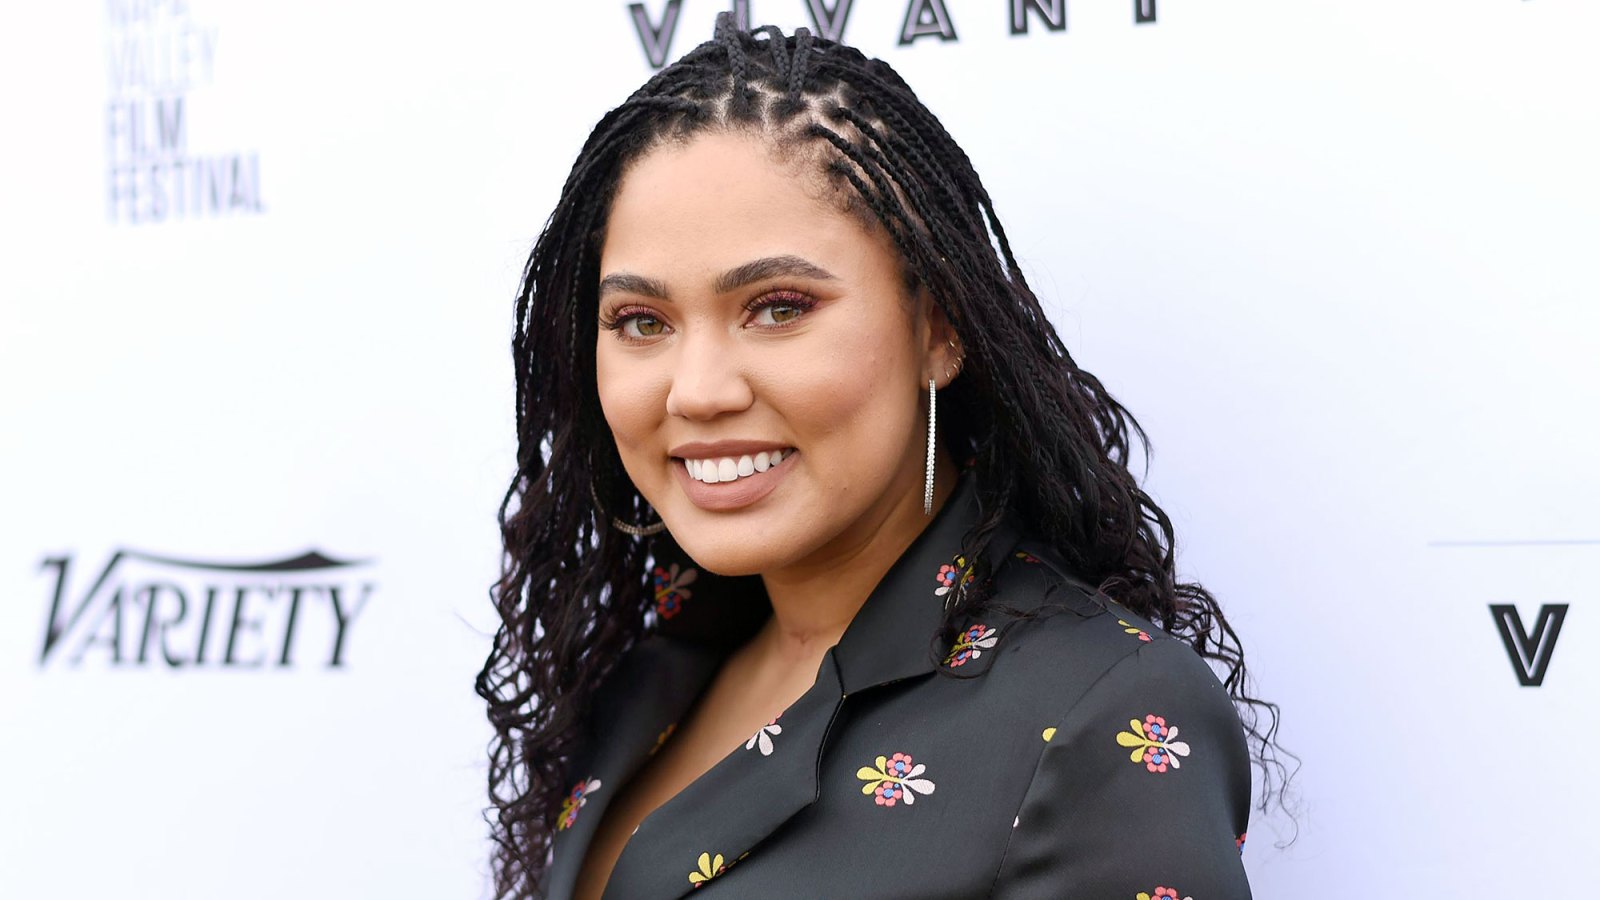 Ayesha Curry attends Vivant launch Ayesha Curry Looks Ahead After Temporary Closure of Her Restaurants